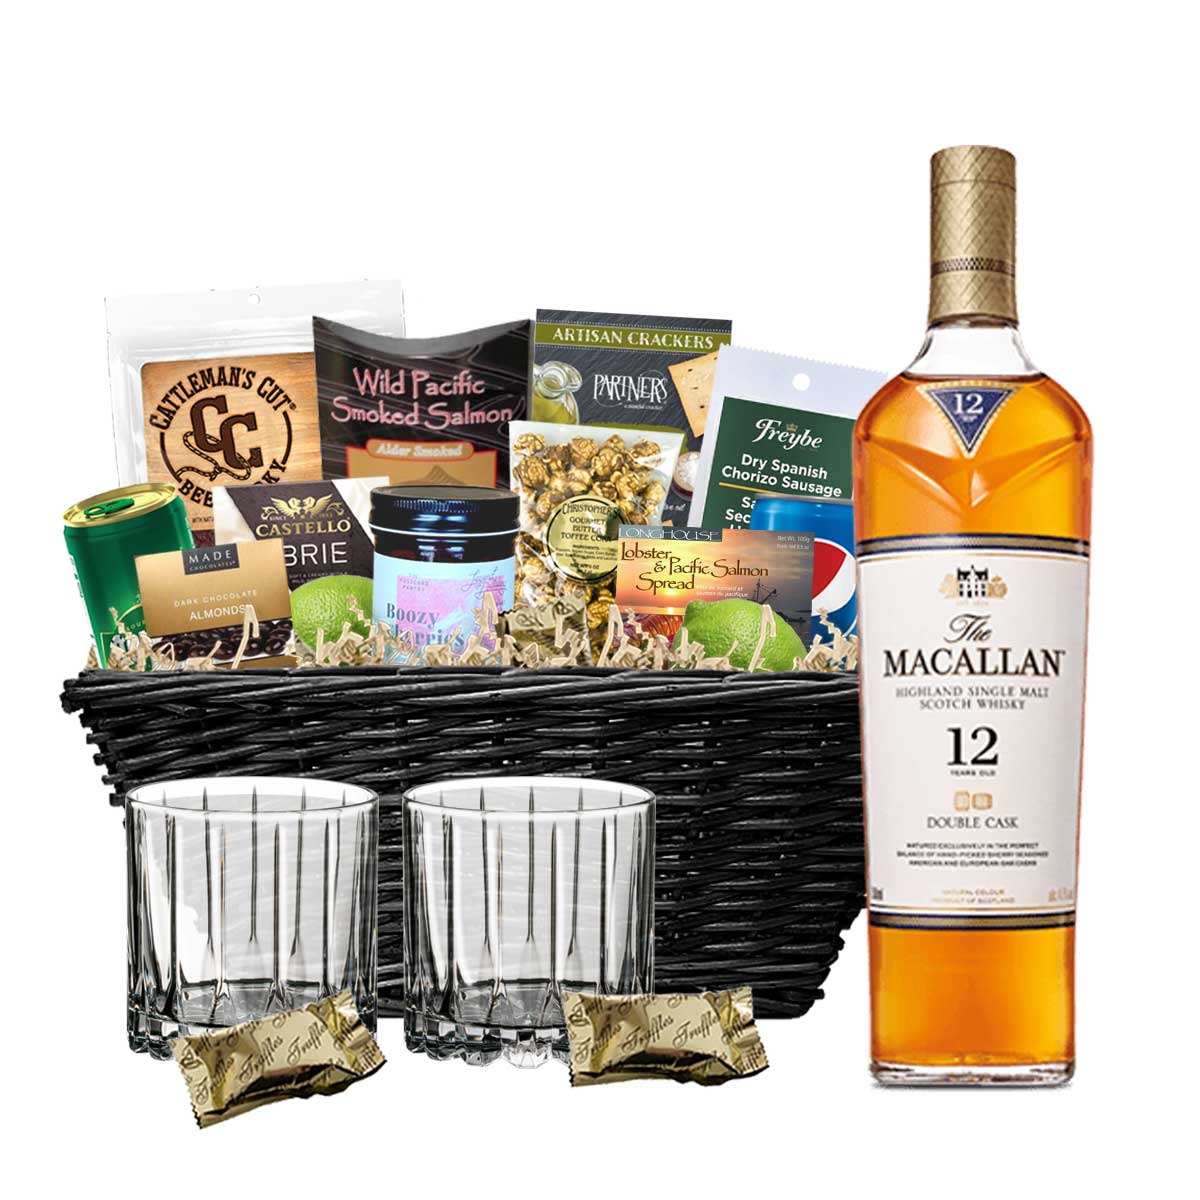 TAG Liquor Stores BC - Macallan 12 Year Old Double Cask Scotch Whisky 750ml Gift Basket